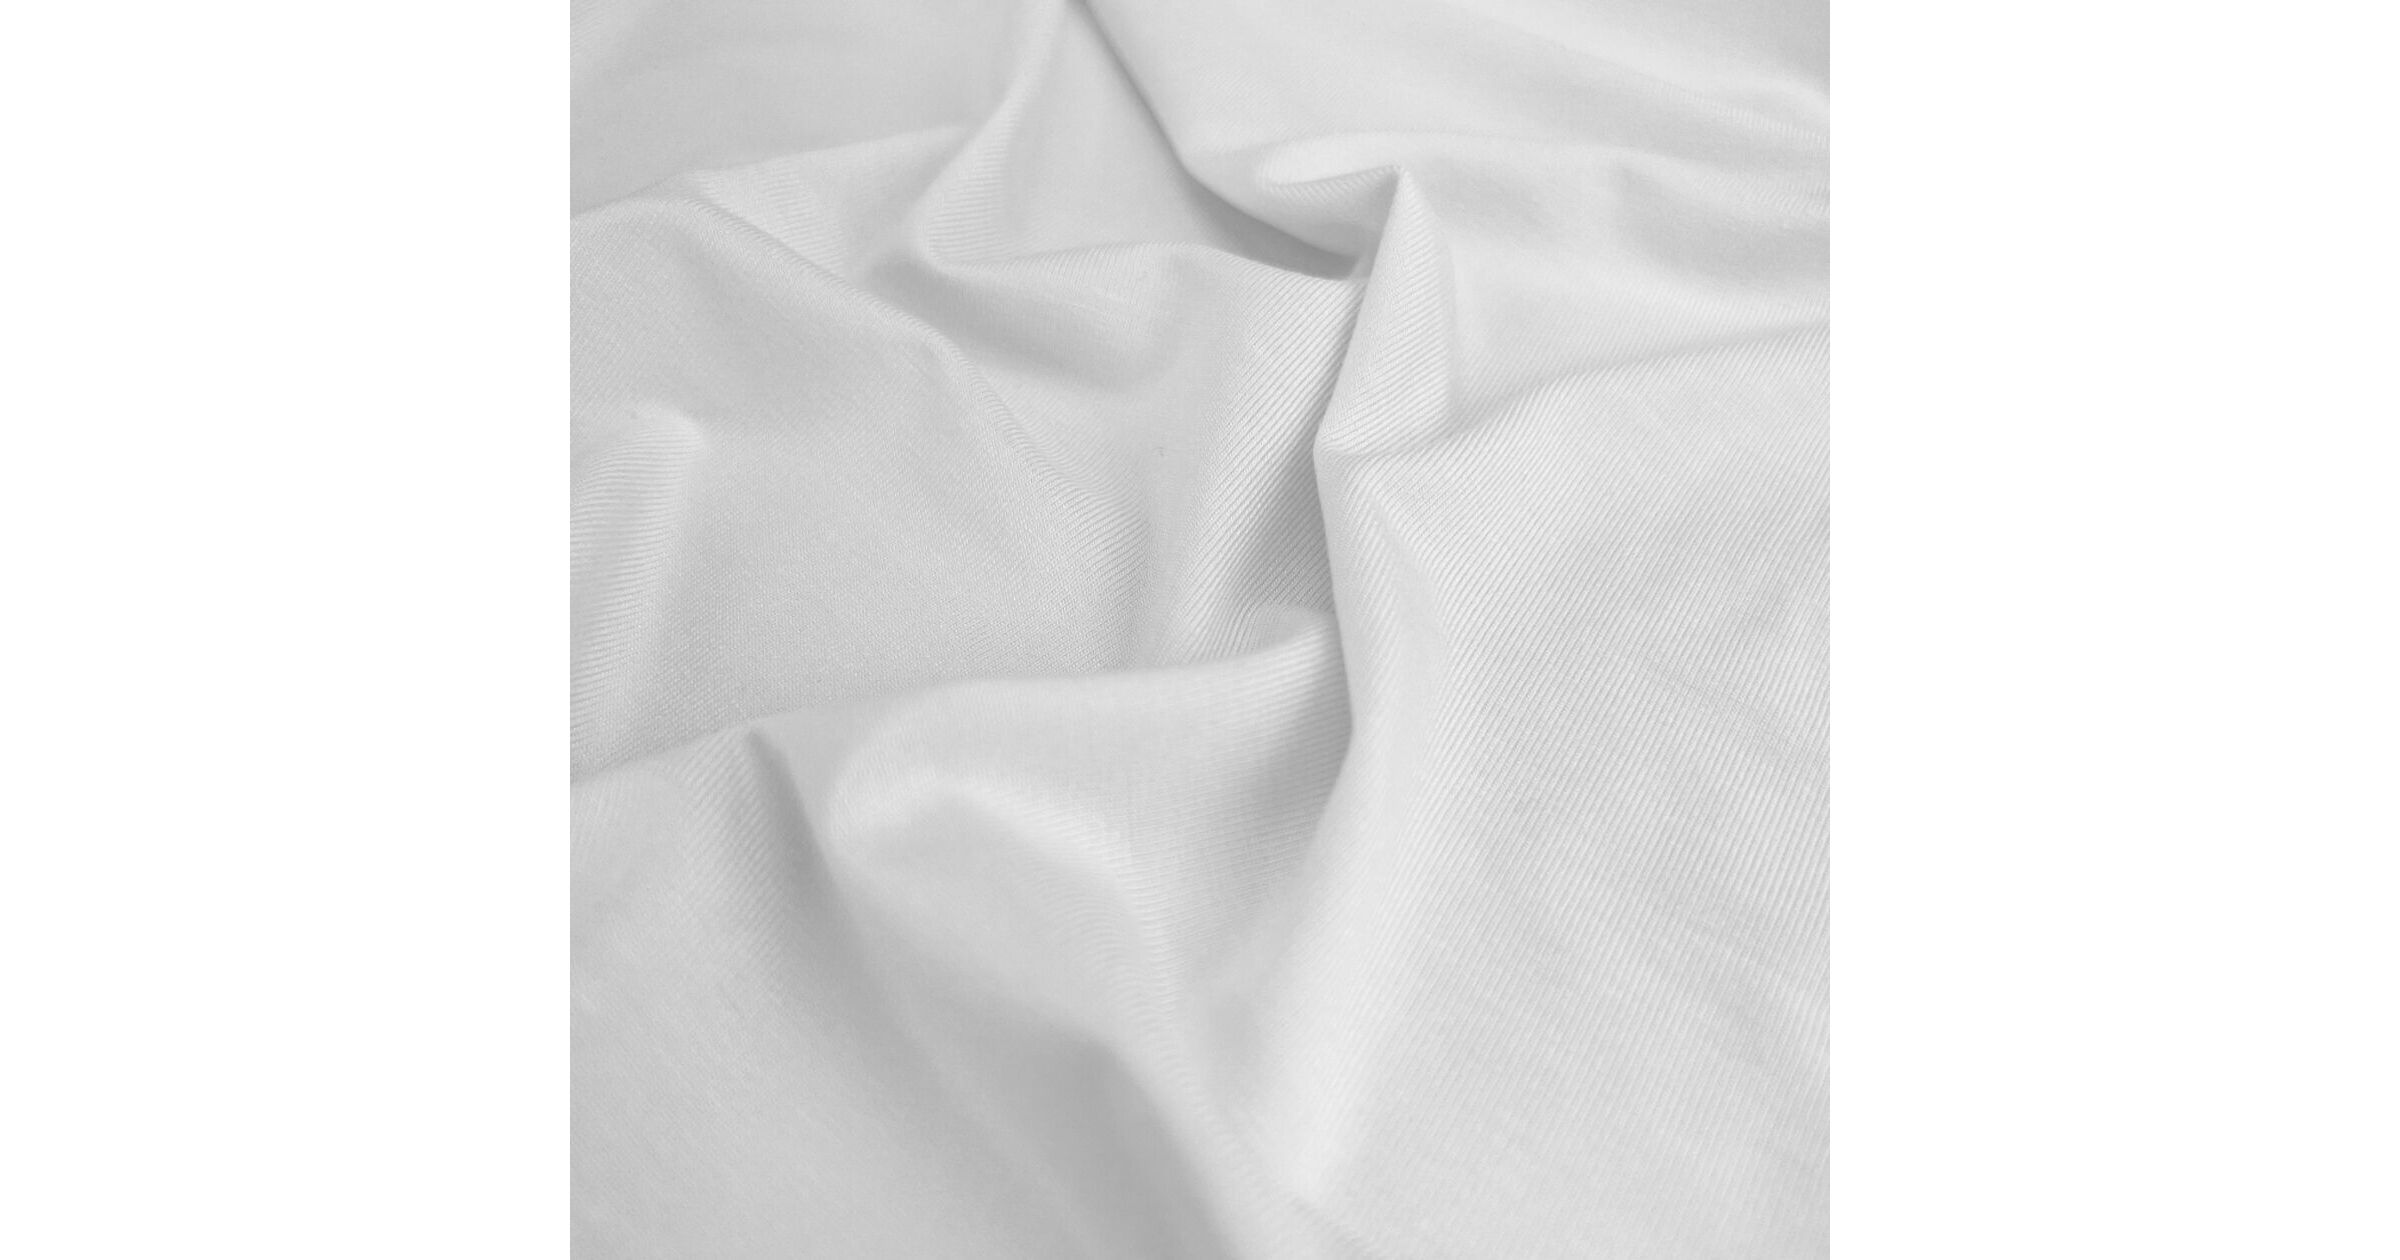 SALE- White- 240gsm cotton/elastane jersey ribbing fabric- 25CM + 1FQ -  Bobbins & Buttons Fabric Shop Leicester, Sewing Patterns, Sewing Classes